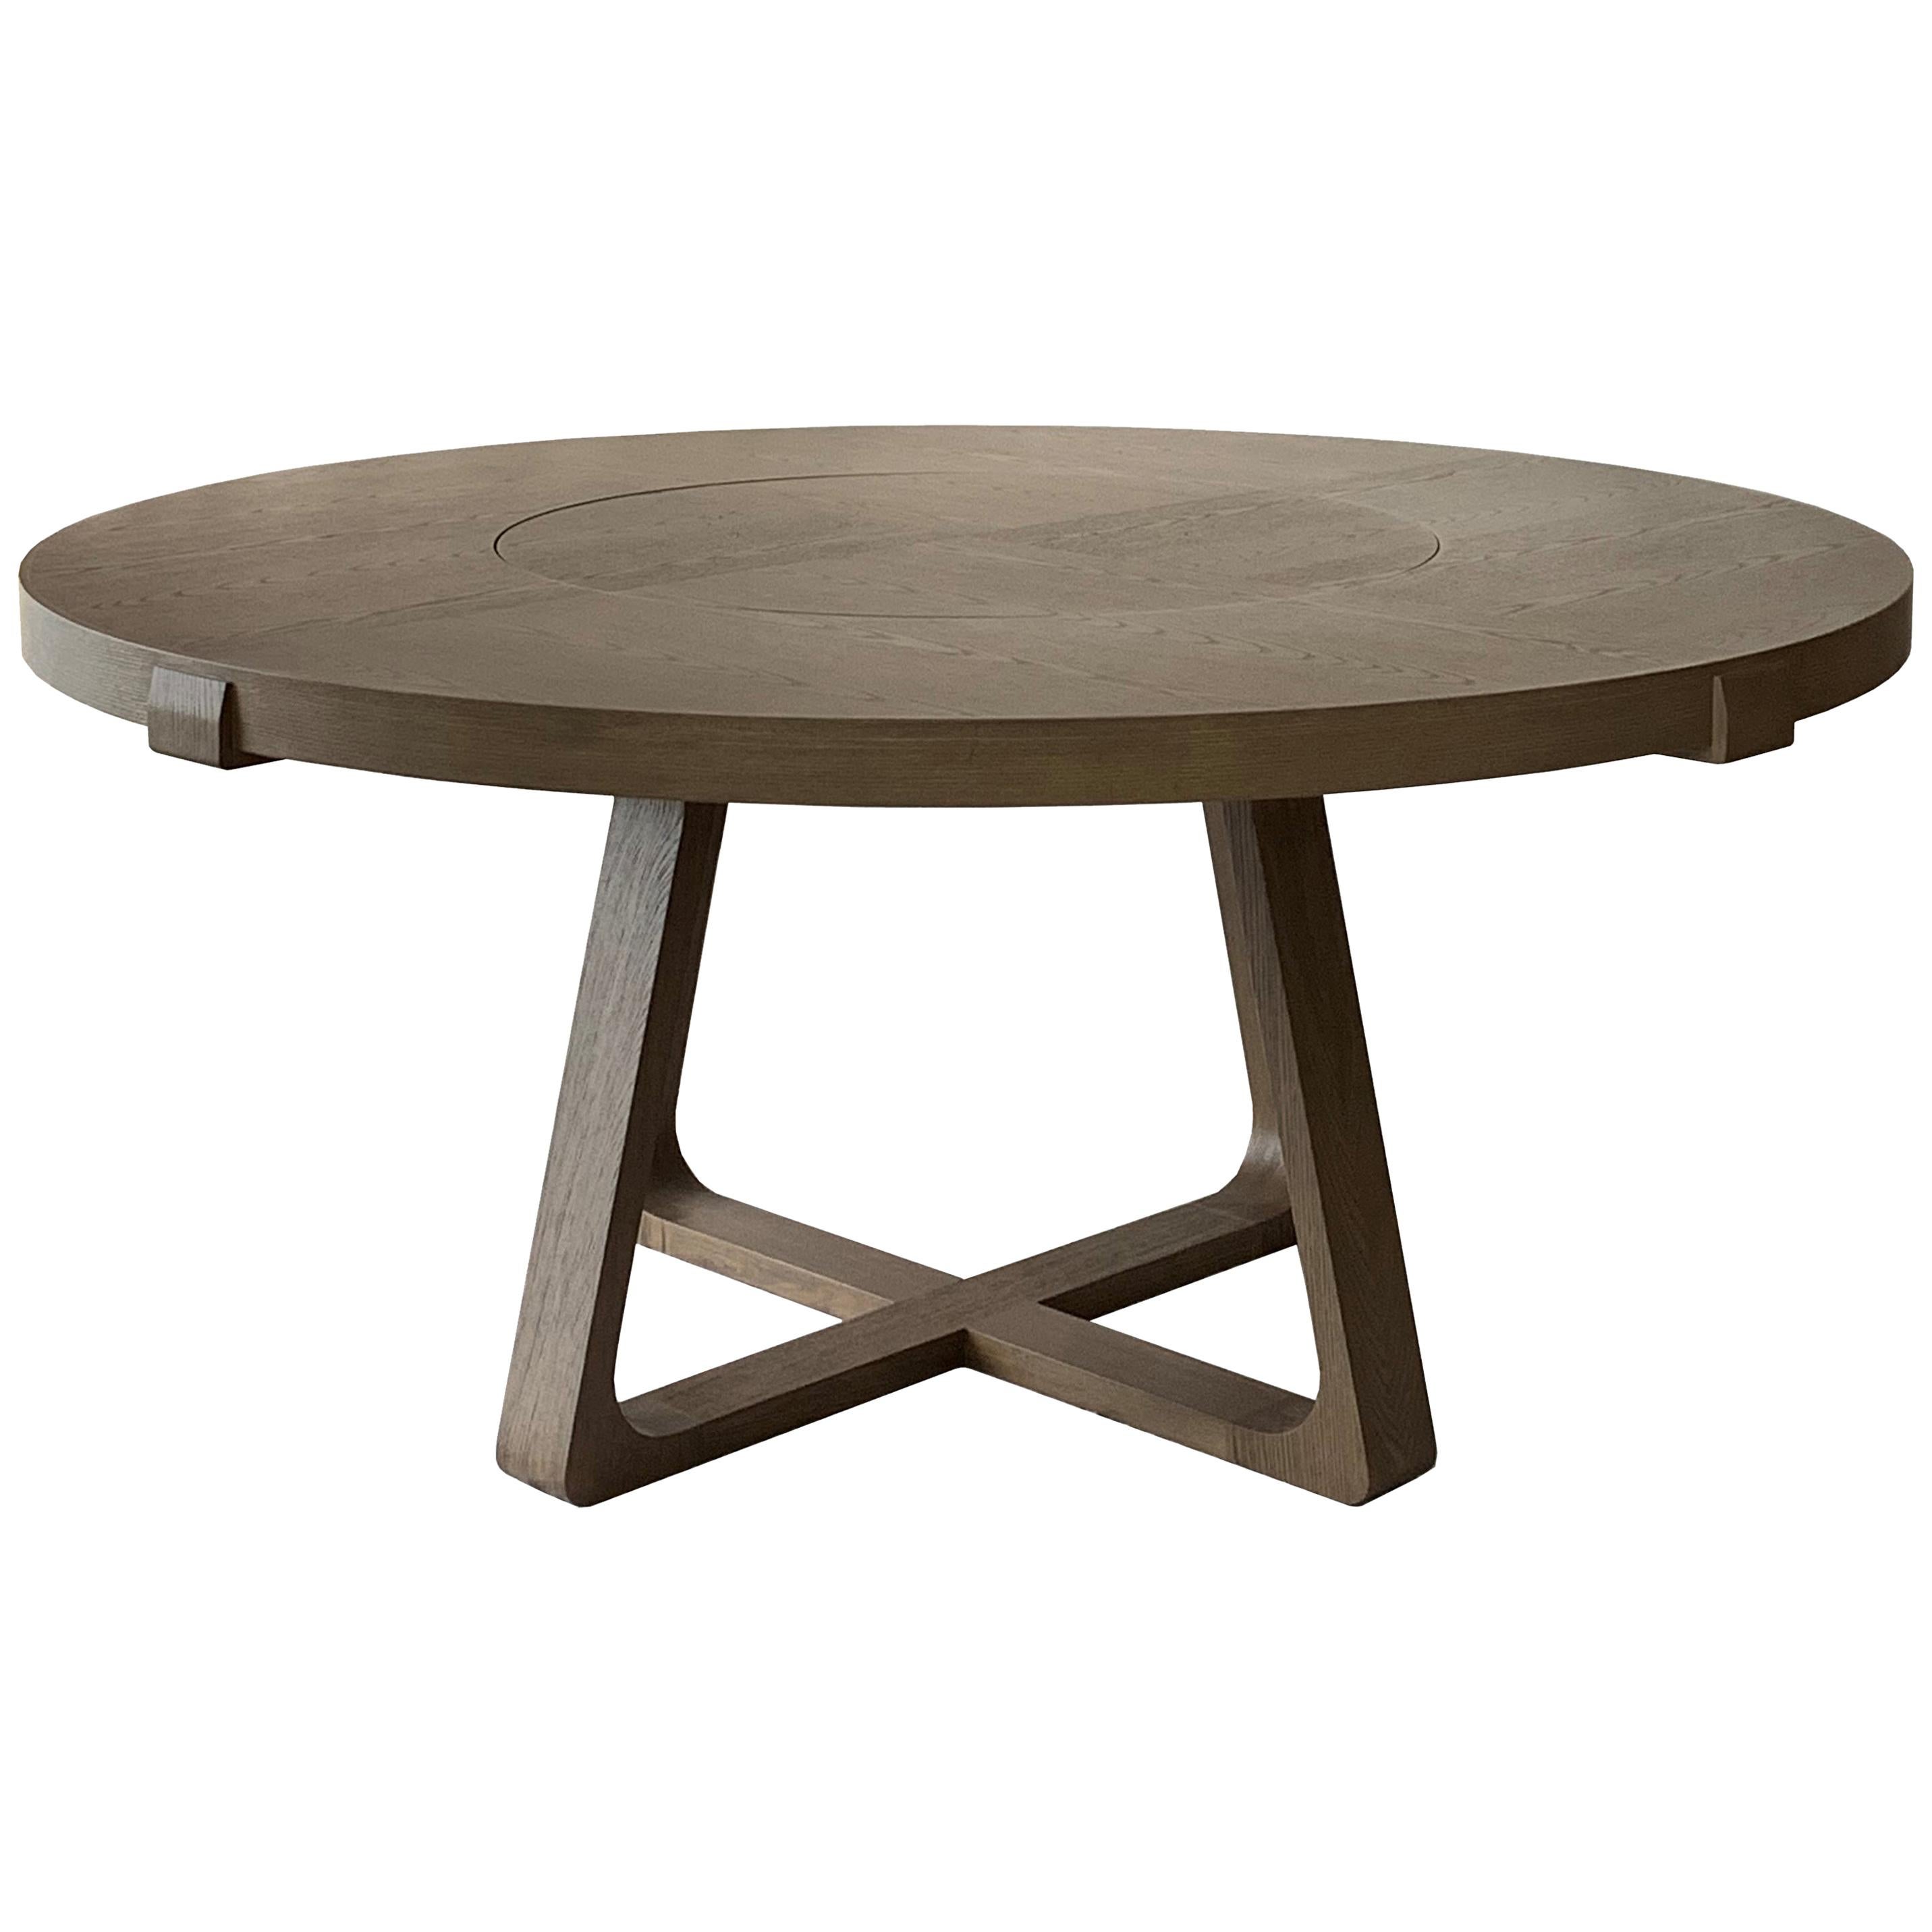 Round Dining Table With Lazy Susan 160cm Interlock André Fu Living Grey Oak New